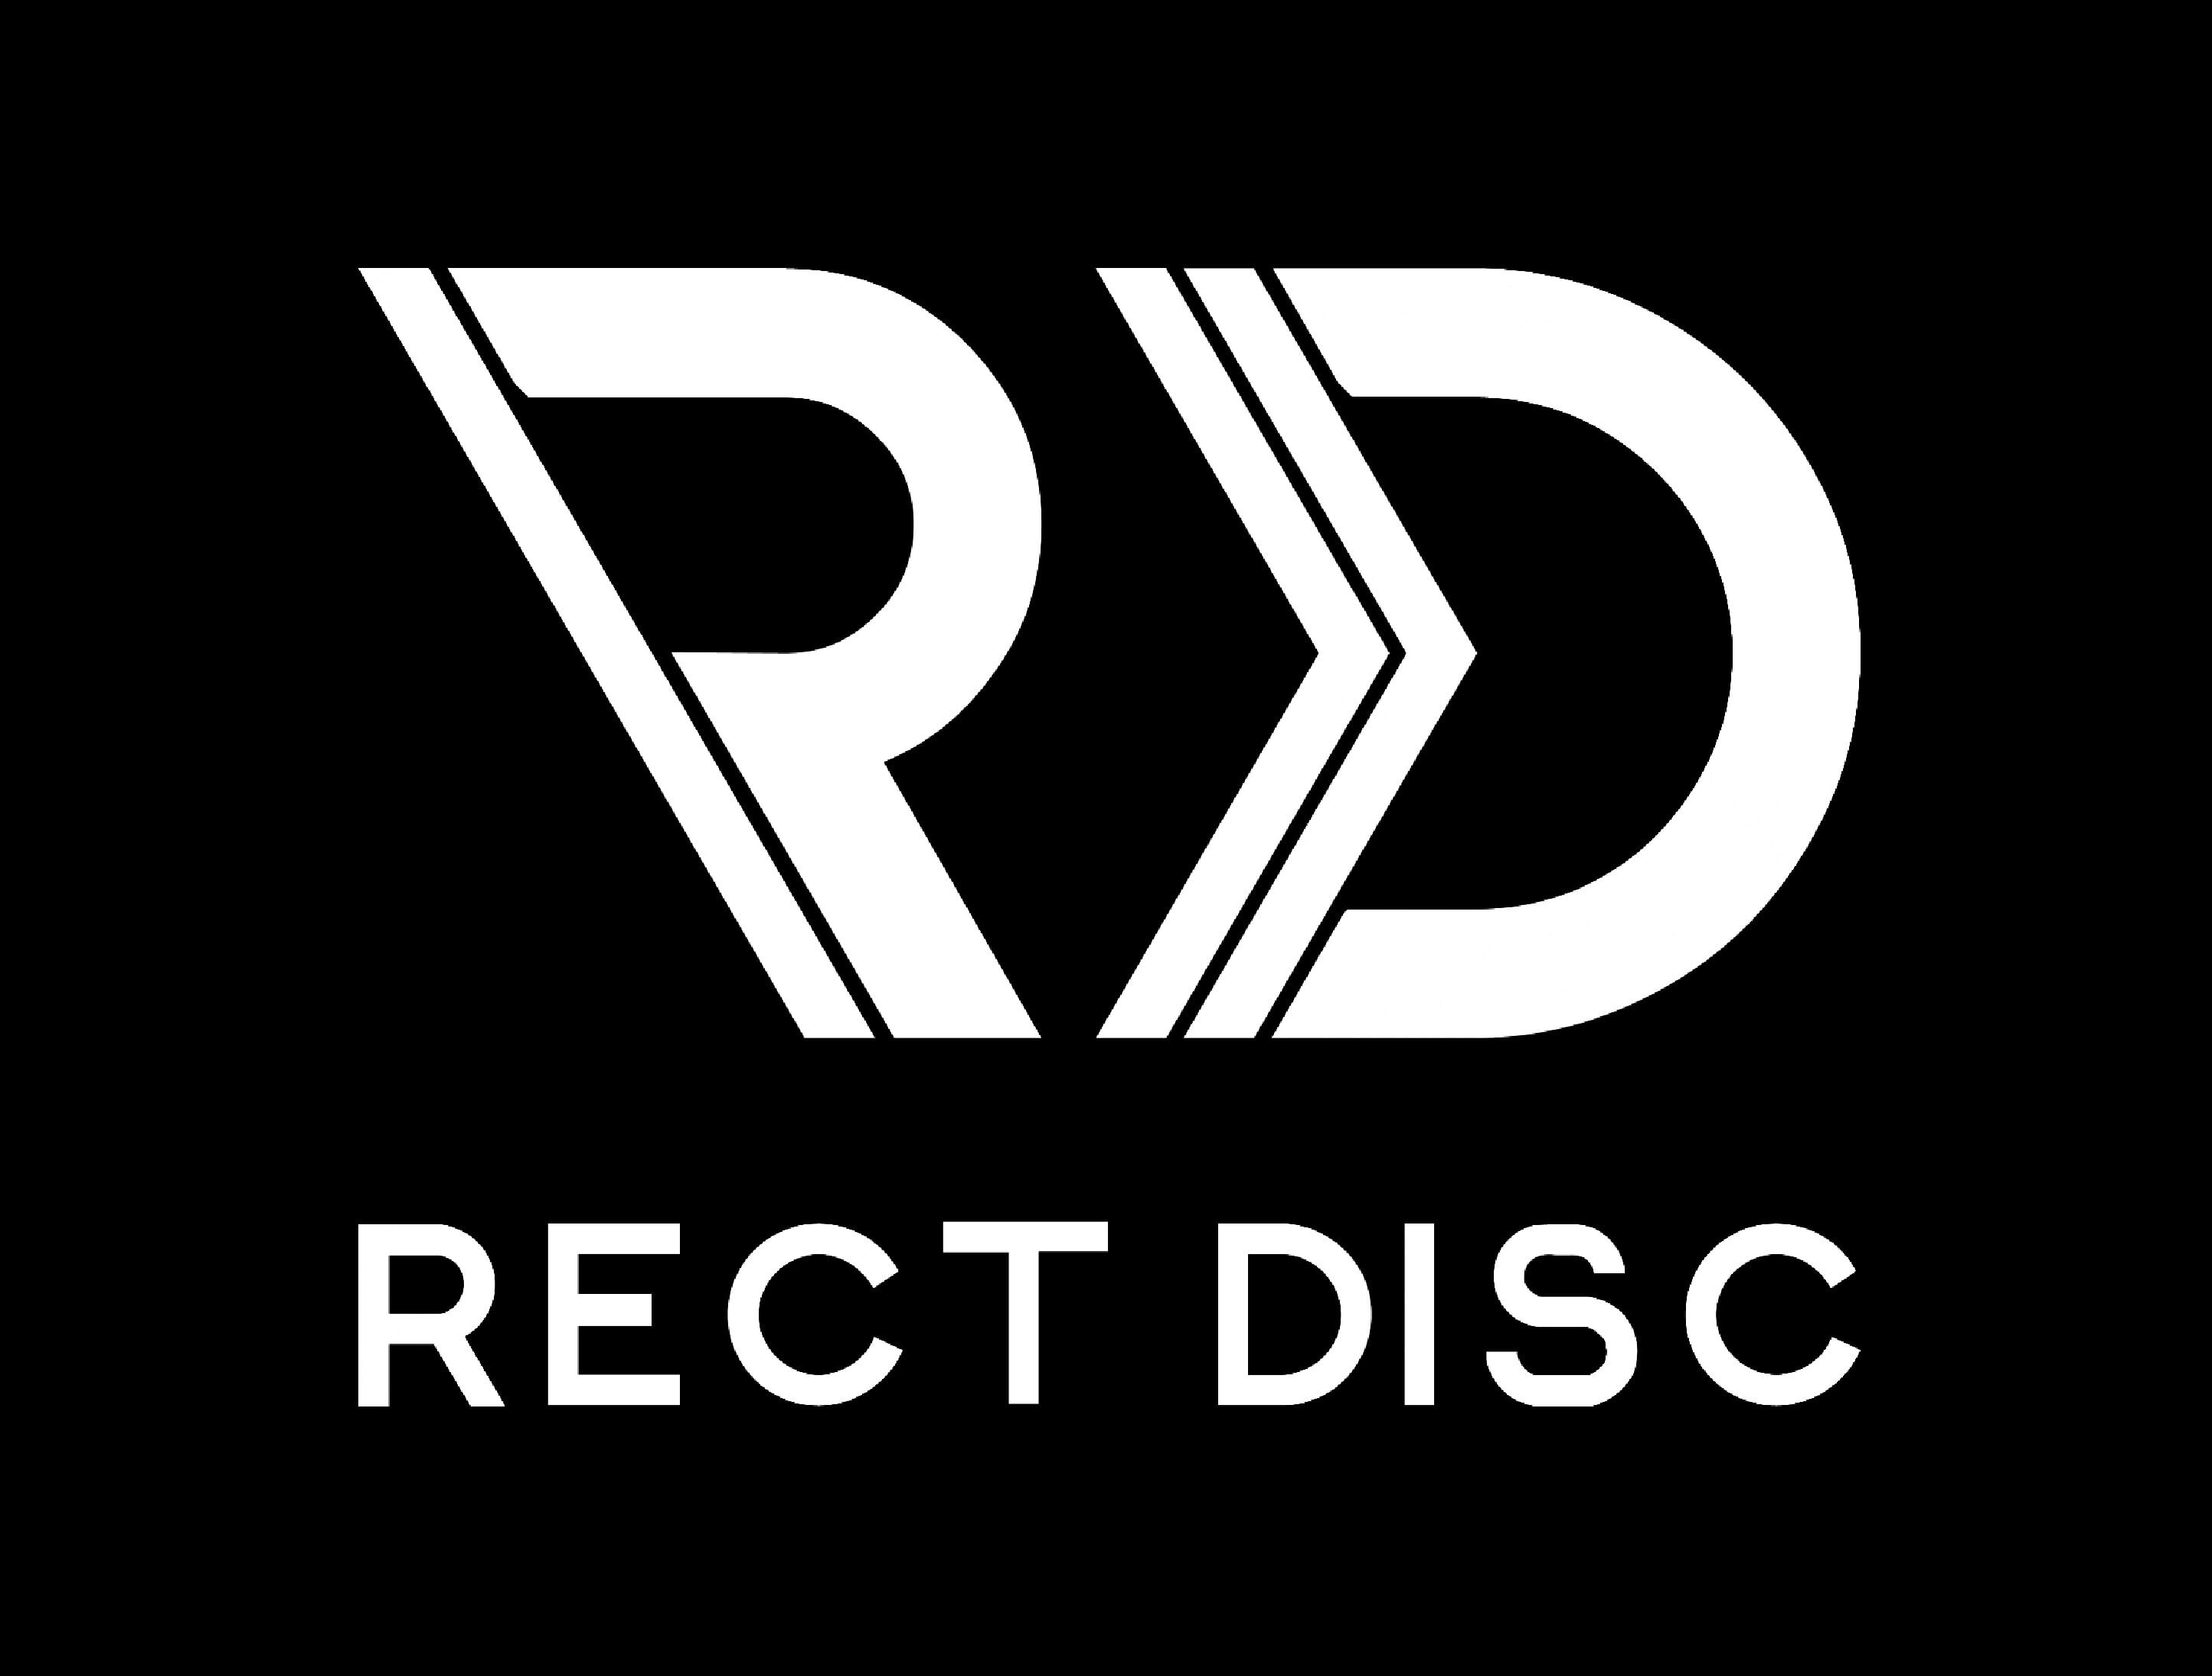 RECT DISC